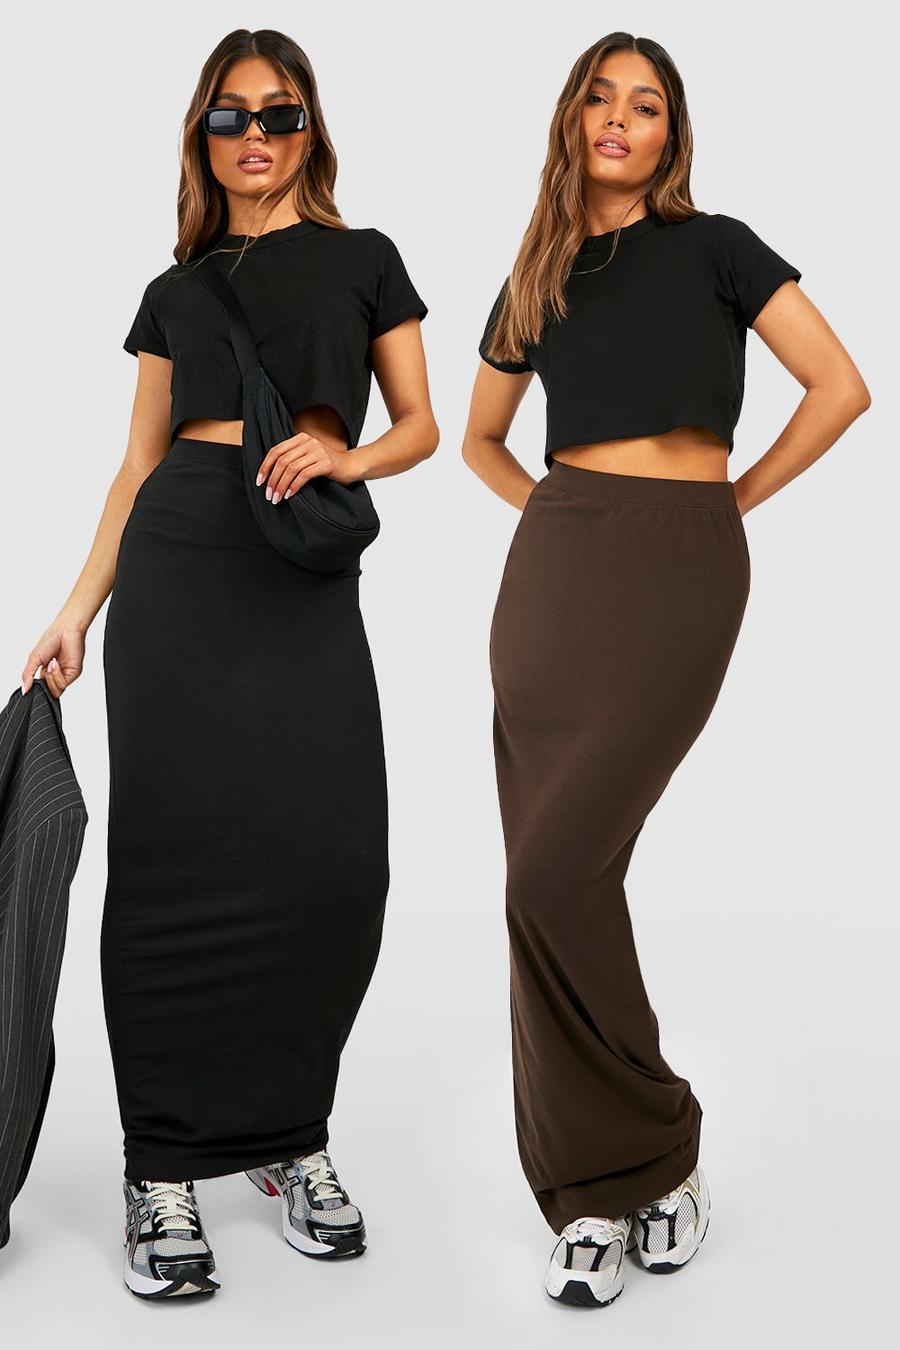 Cotton 2 Pack Black & Chocolate High Waisted Maxi Skirt